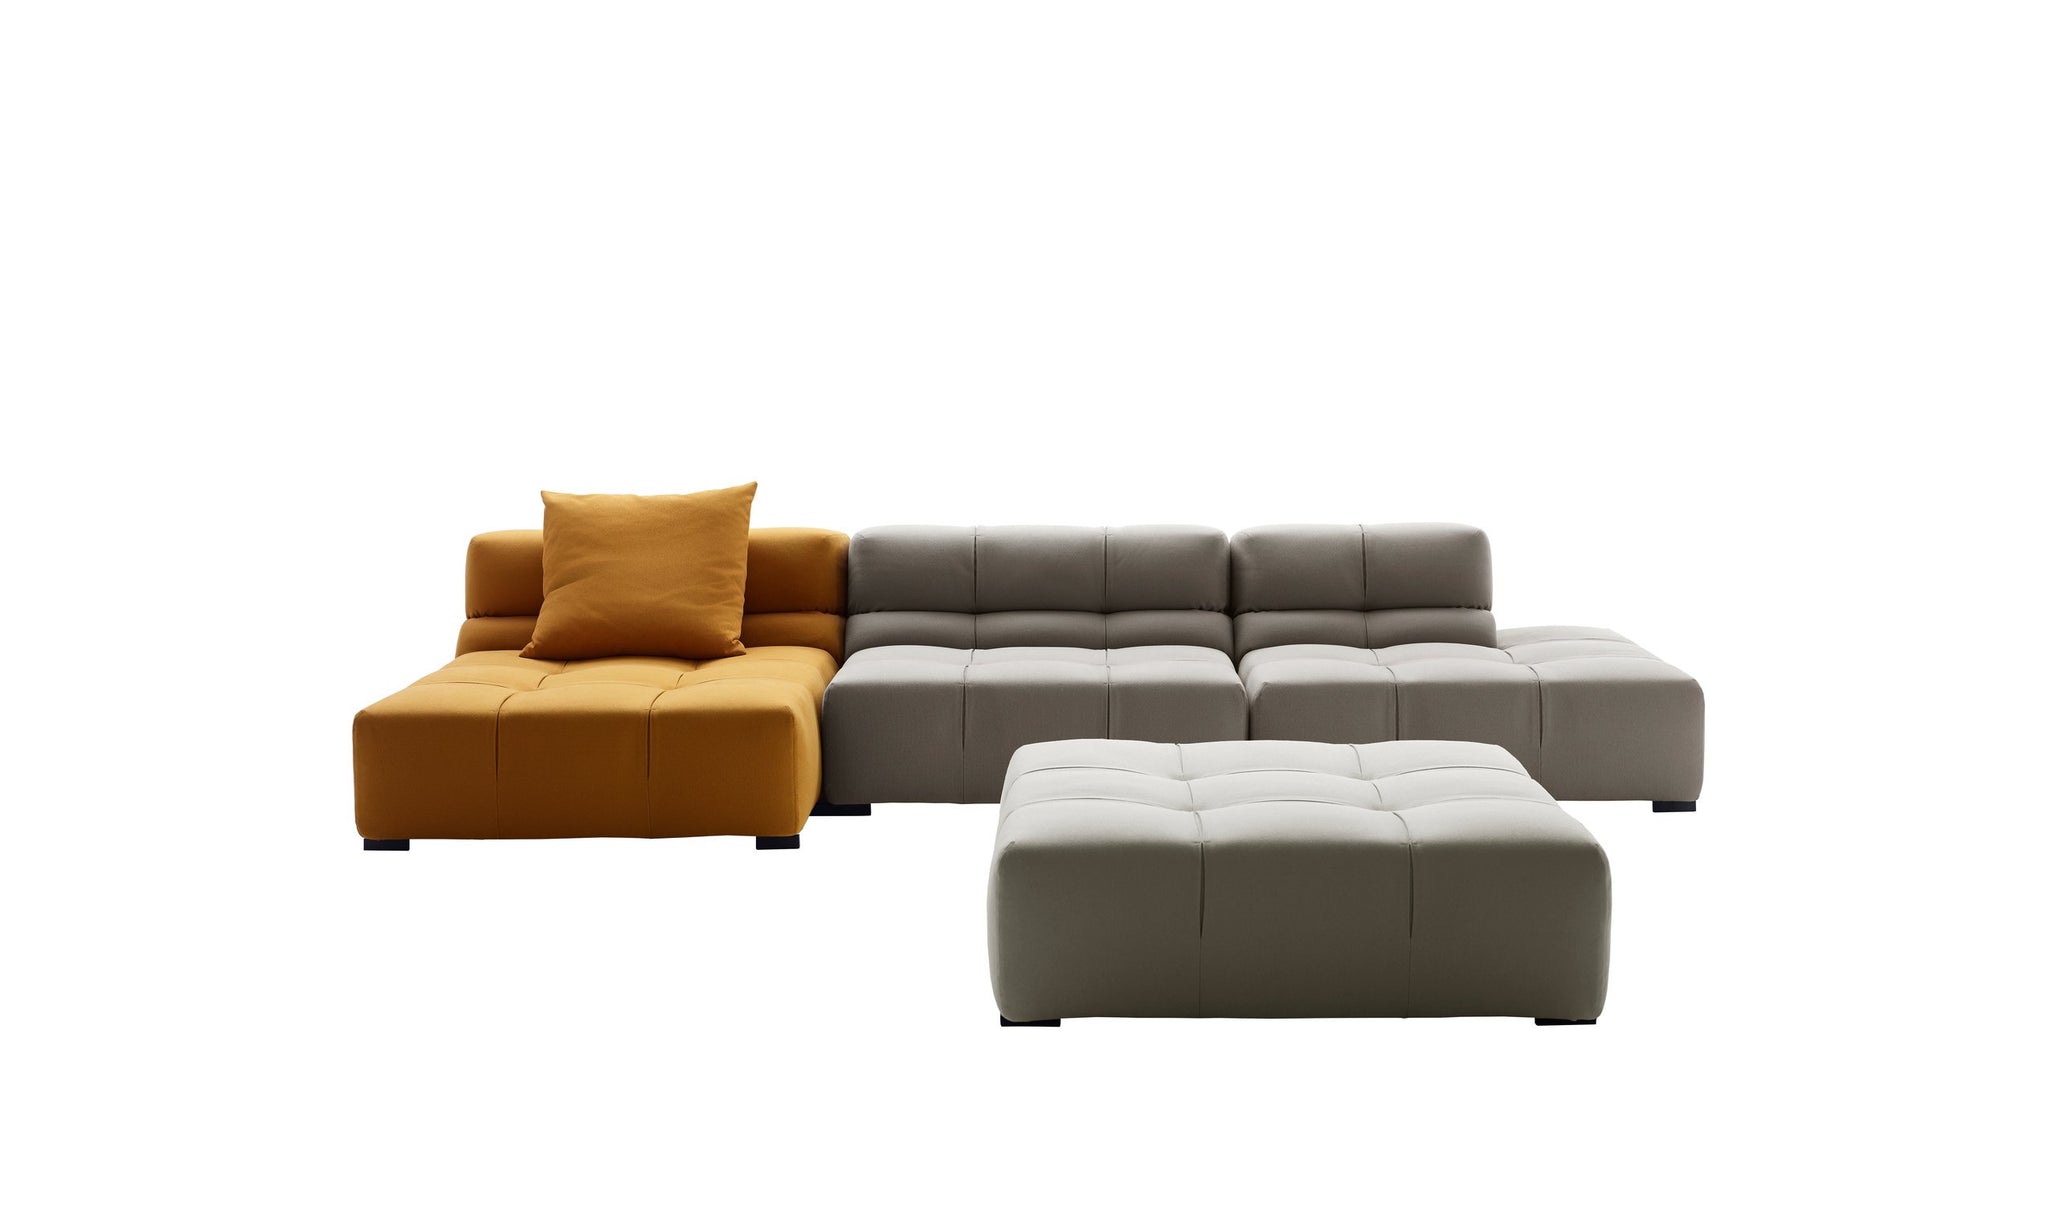 Tufty Time 15 sofa with Qty 1 Back cushion (60 x 60 cm) and Ottoman